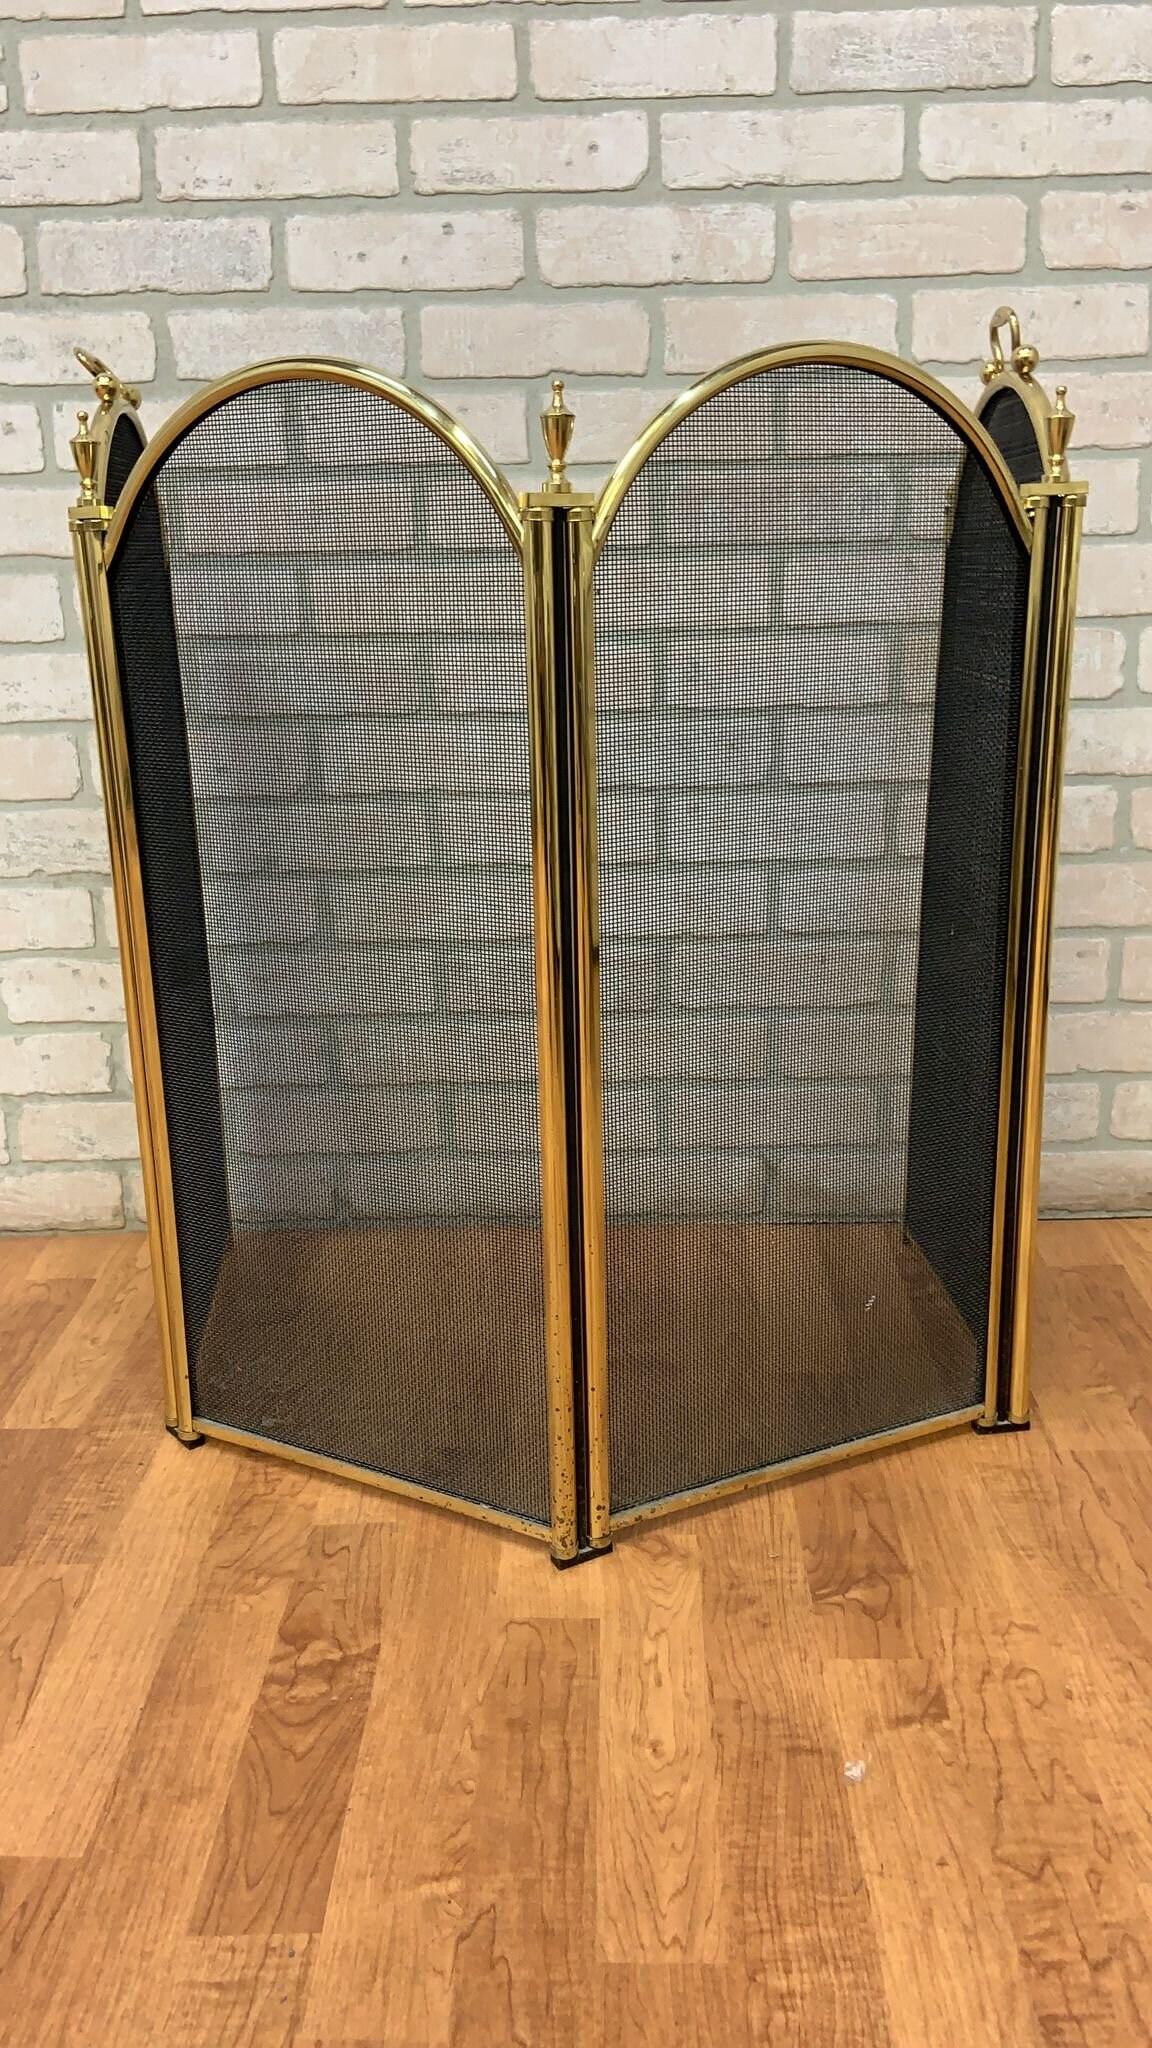 Vintage Mid Century Modern Black Mesh with Brass Ball Handles Finials Folding 4 Panel  Hearth Accessory Fire Place Decor

 Enhance the aesthetic appeal of your fireplace with this vintage fire place decor. Crafted with attention to detail, this